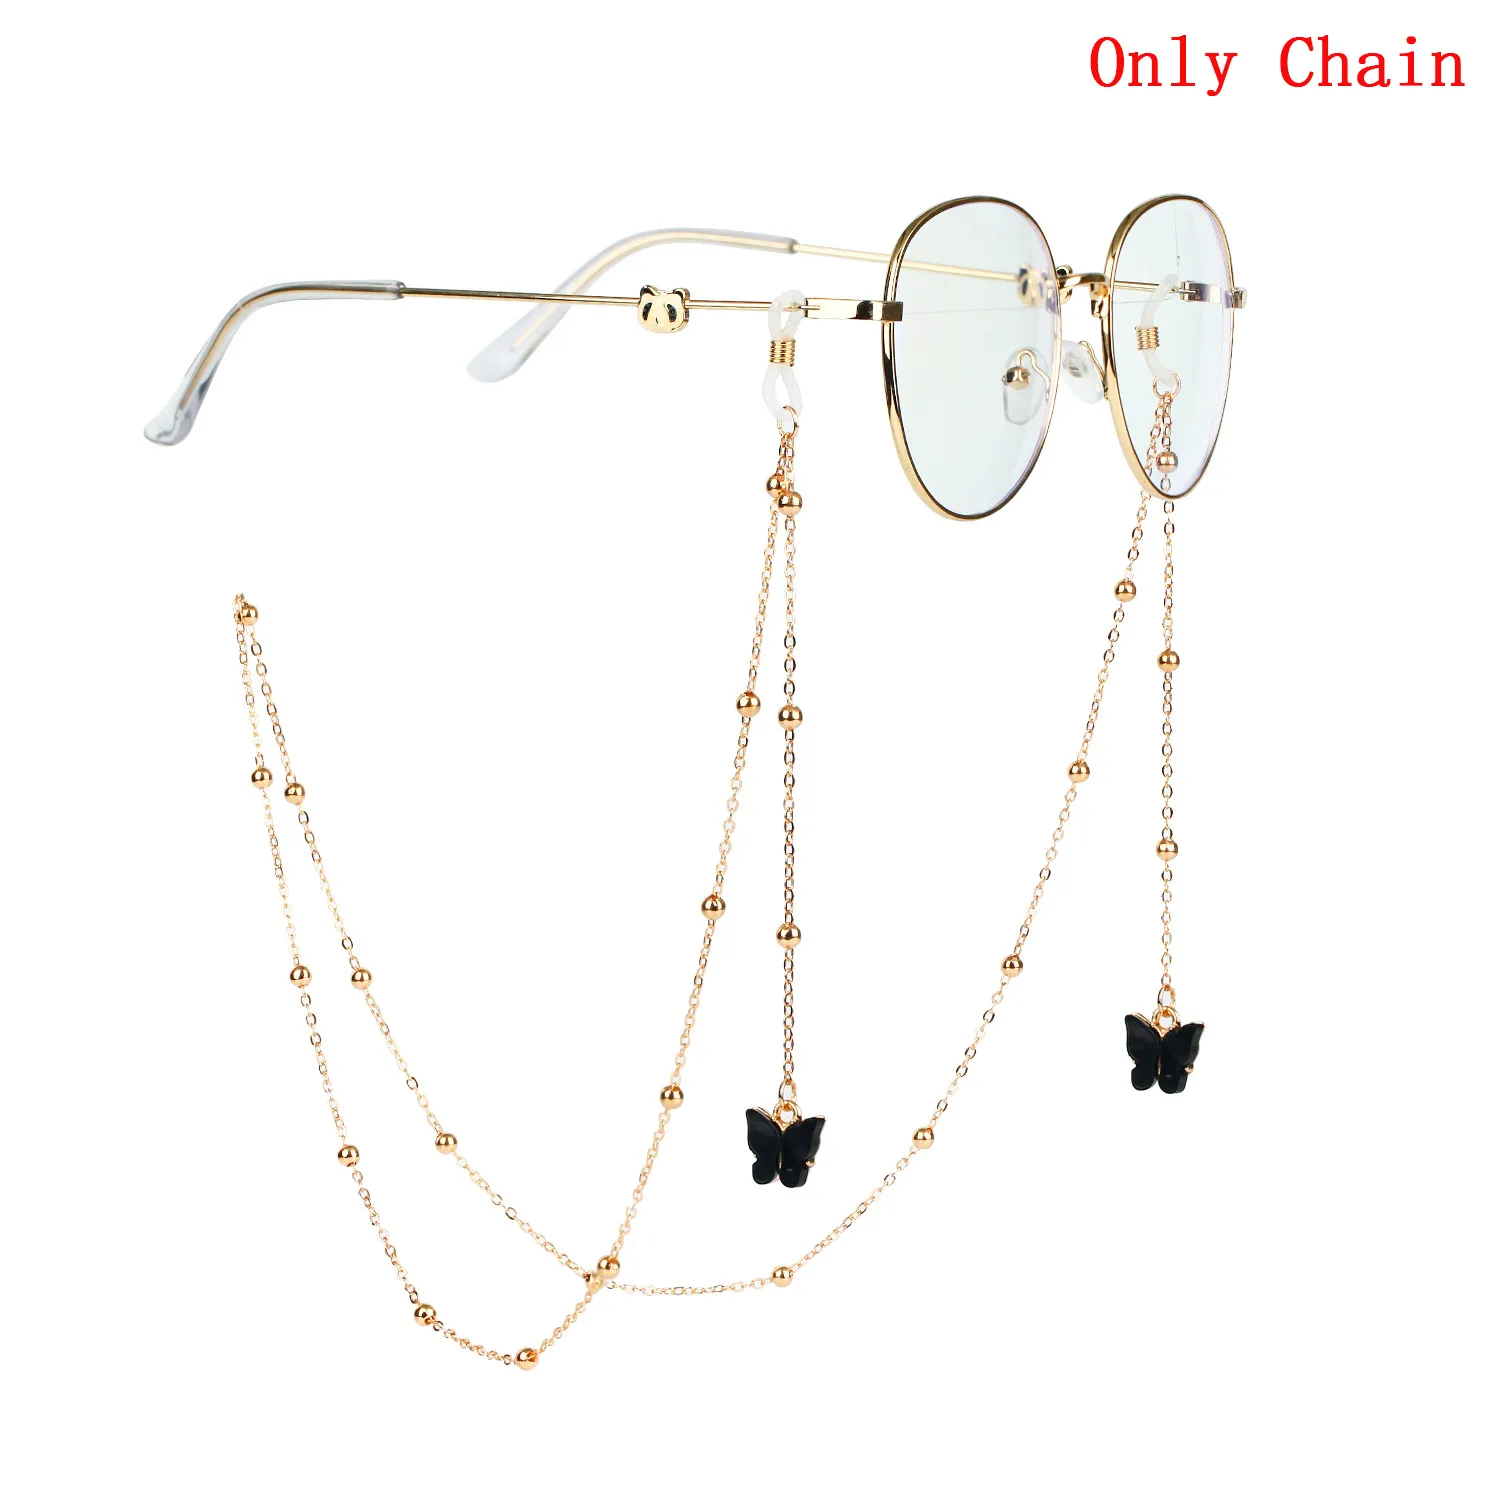 NEW Trending Butterfly Pendant Glasses Chains Eyeglasses Sunglasses Spectacles Metal Chain Holder Cord Lanyard Necklace